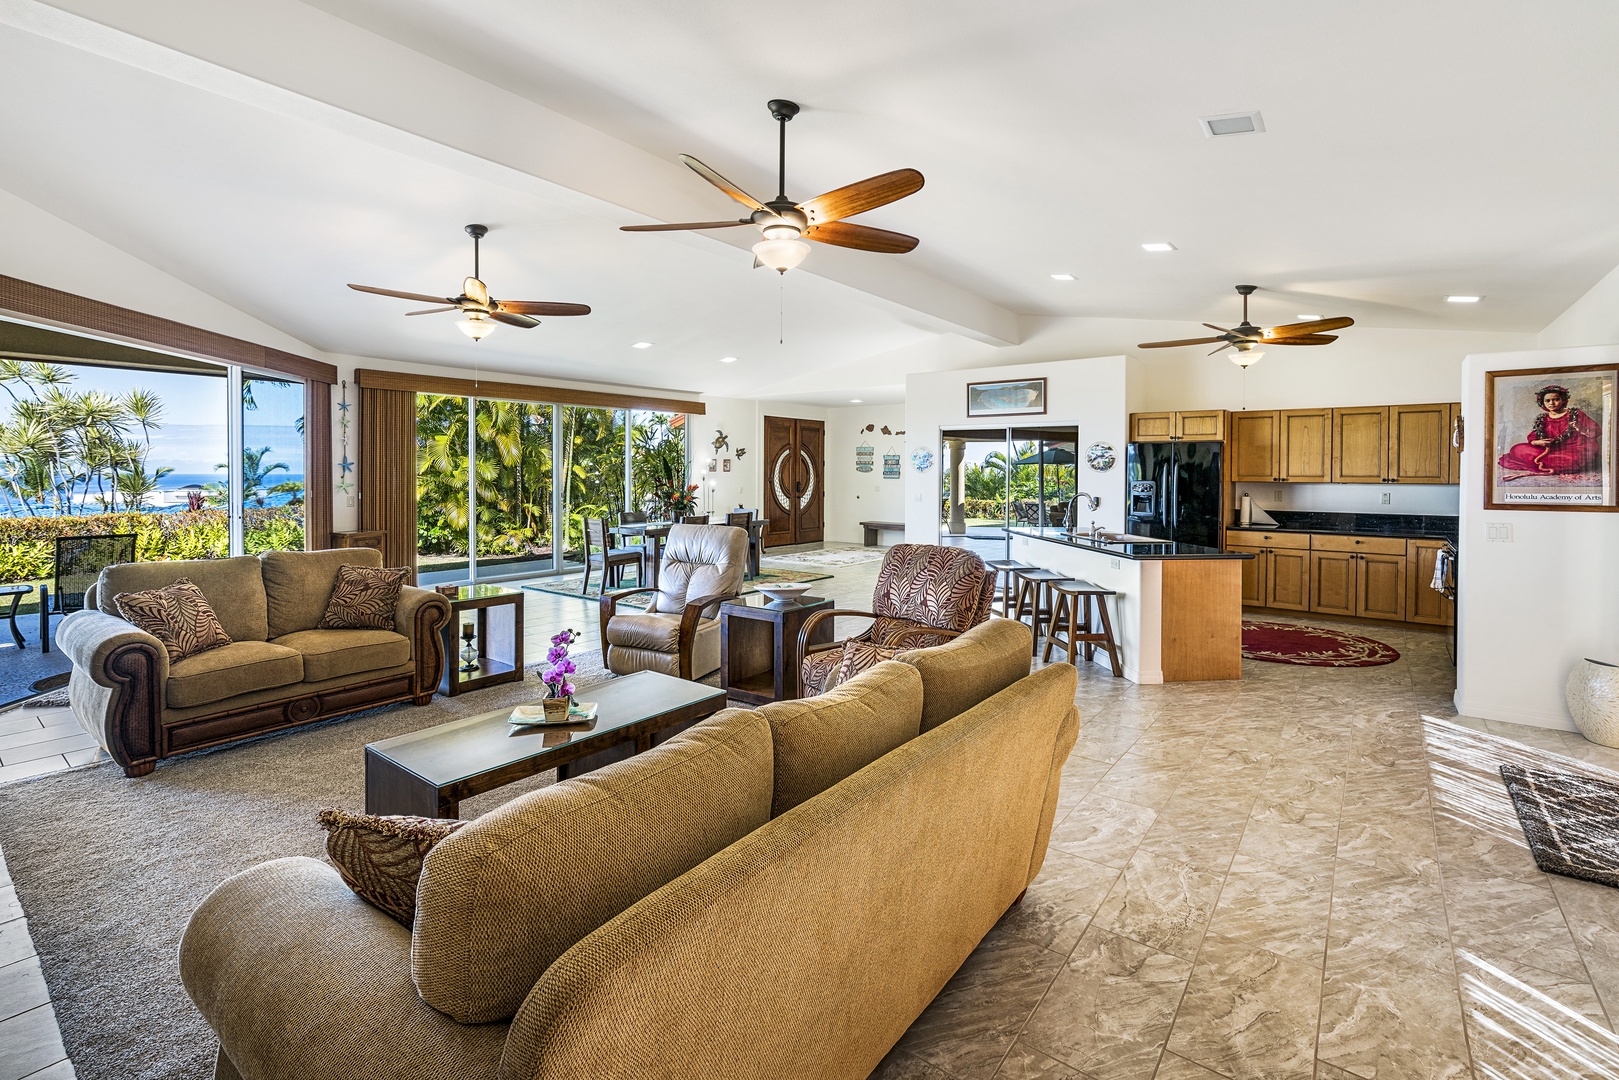 Kailua Kona Vacation Rentals, Maile Hale - Ceiling fans and Air conditioning throughout